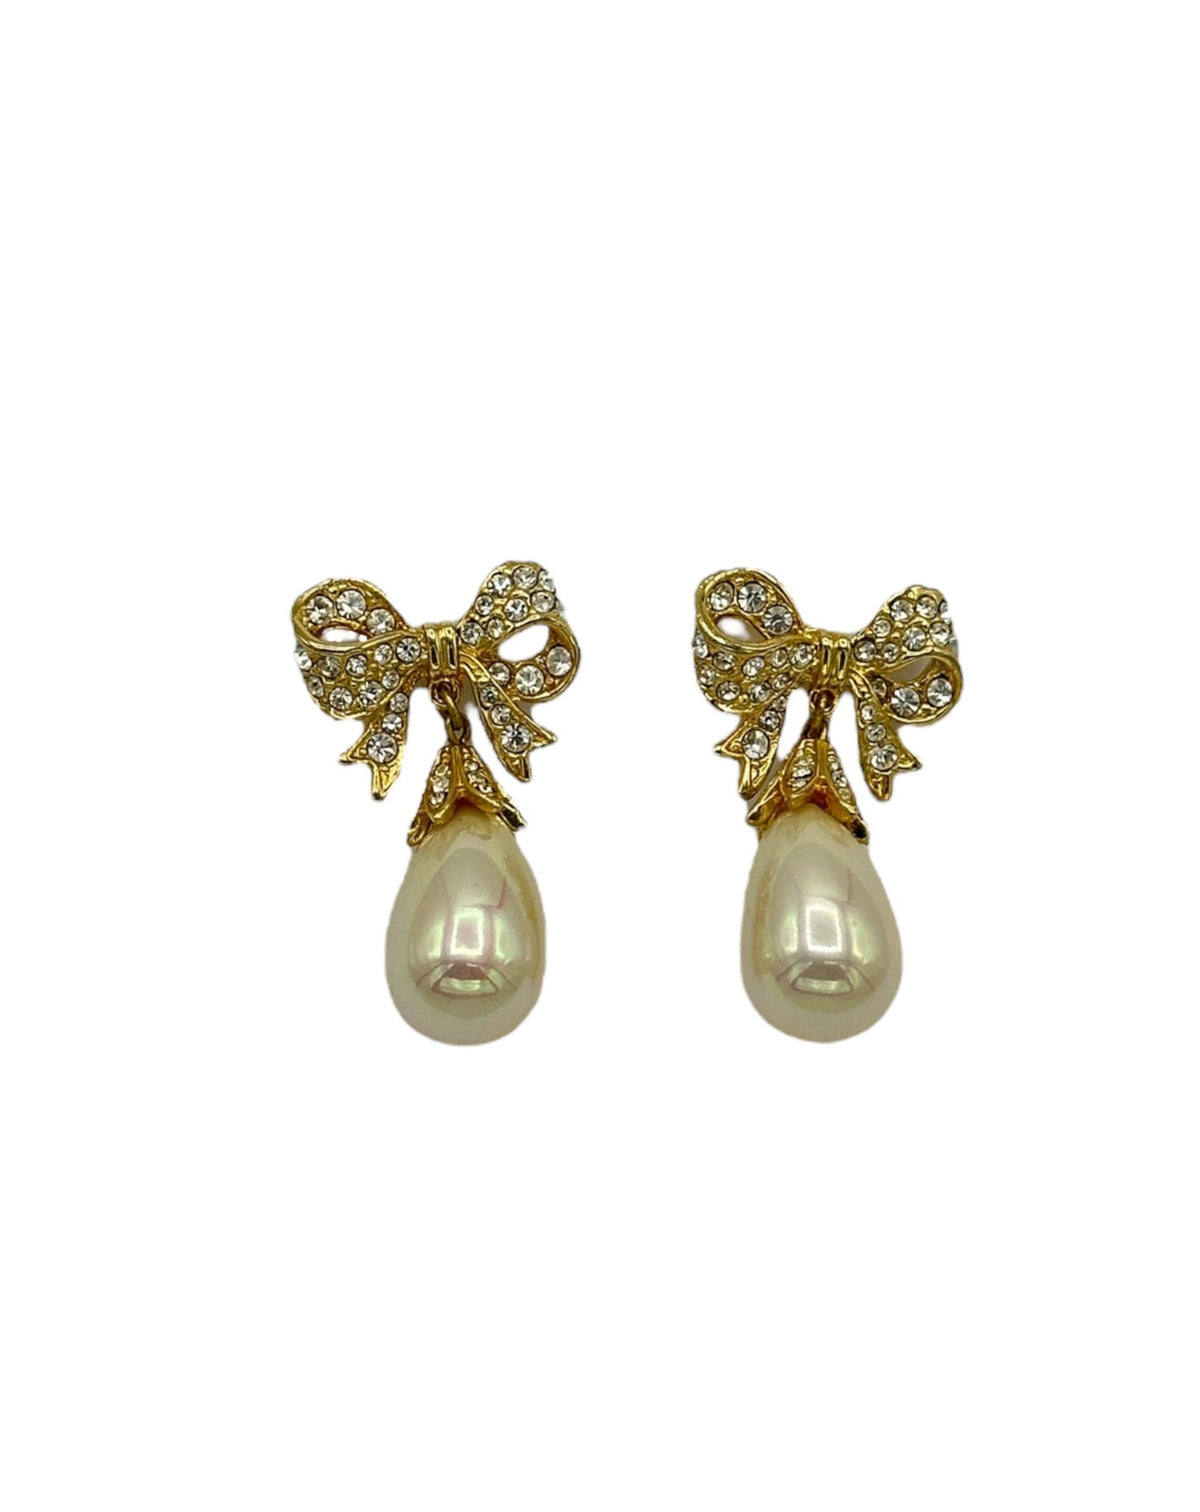 Pave Gold Bow Pearl Drop Vintage Pierced Earrings